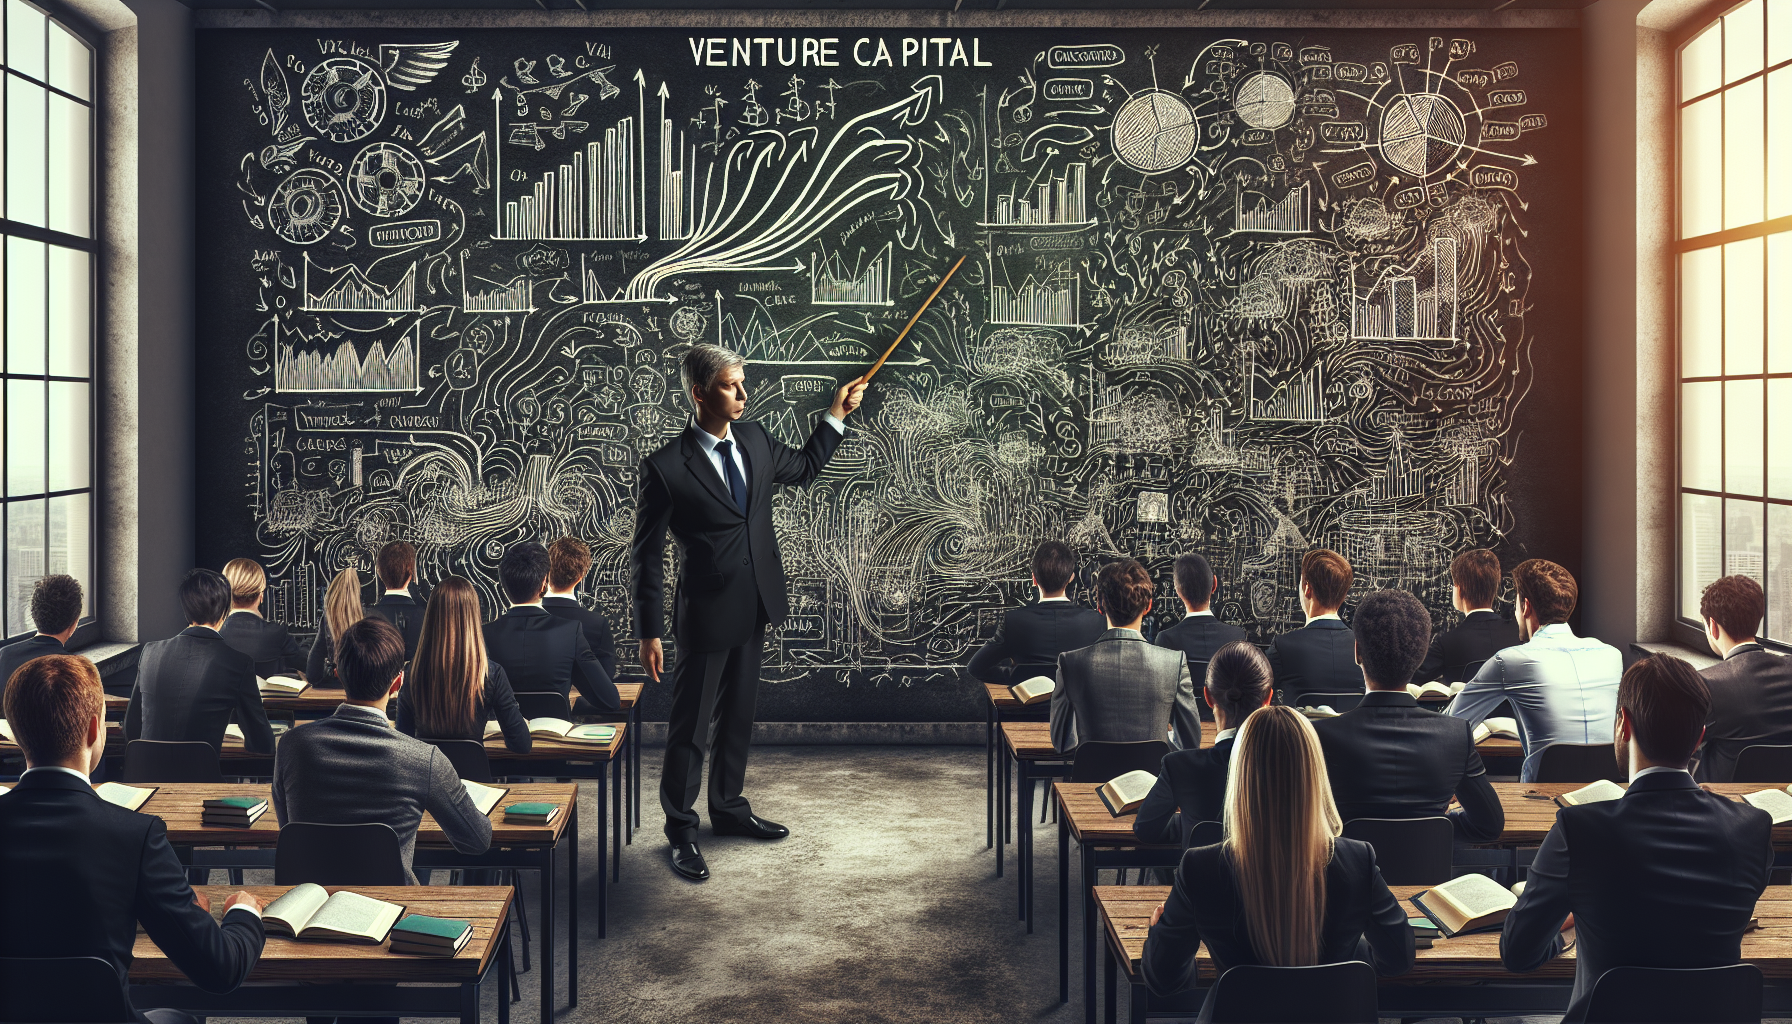 Illustration of entry-level venture capital courses for beginners